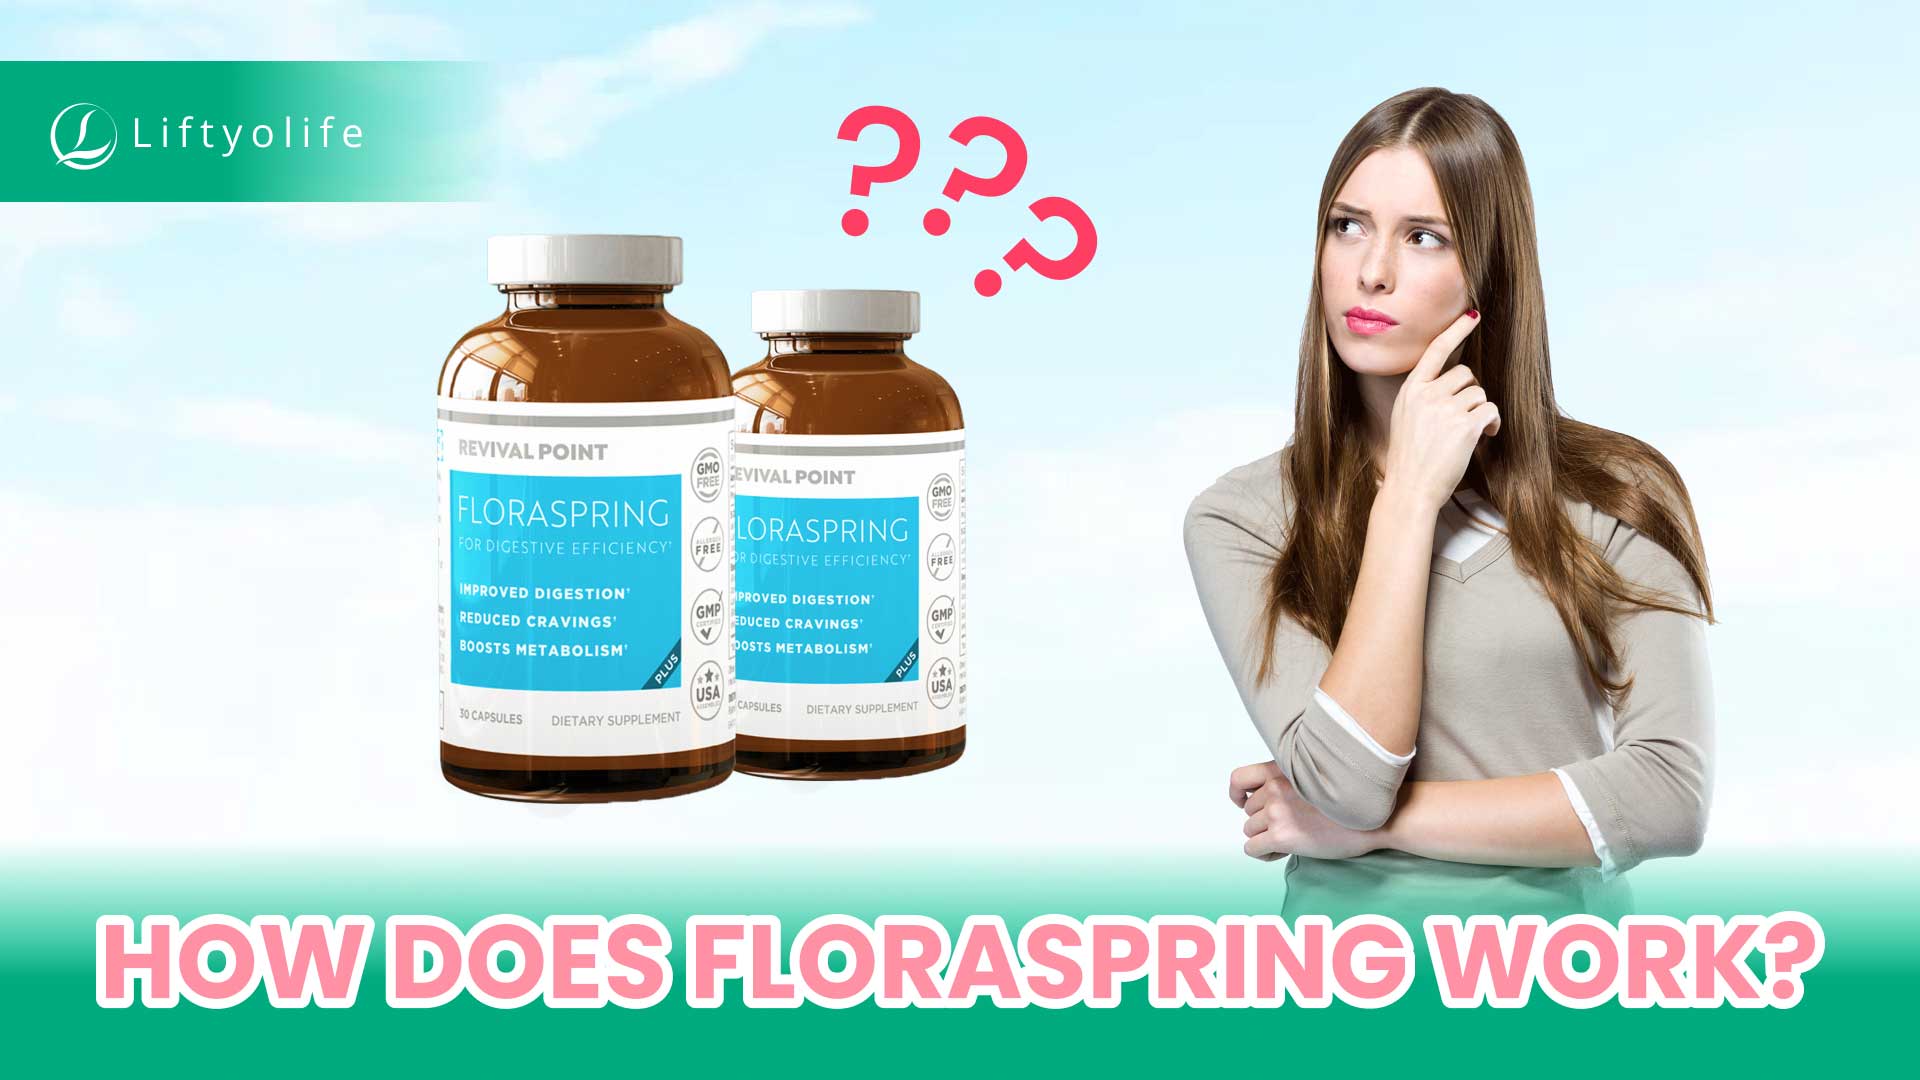 How Does FloraSpring Work?